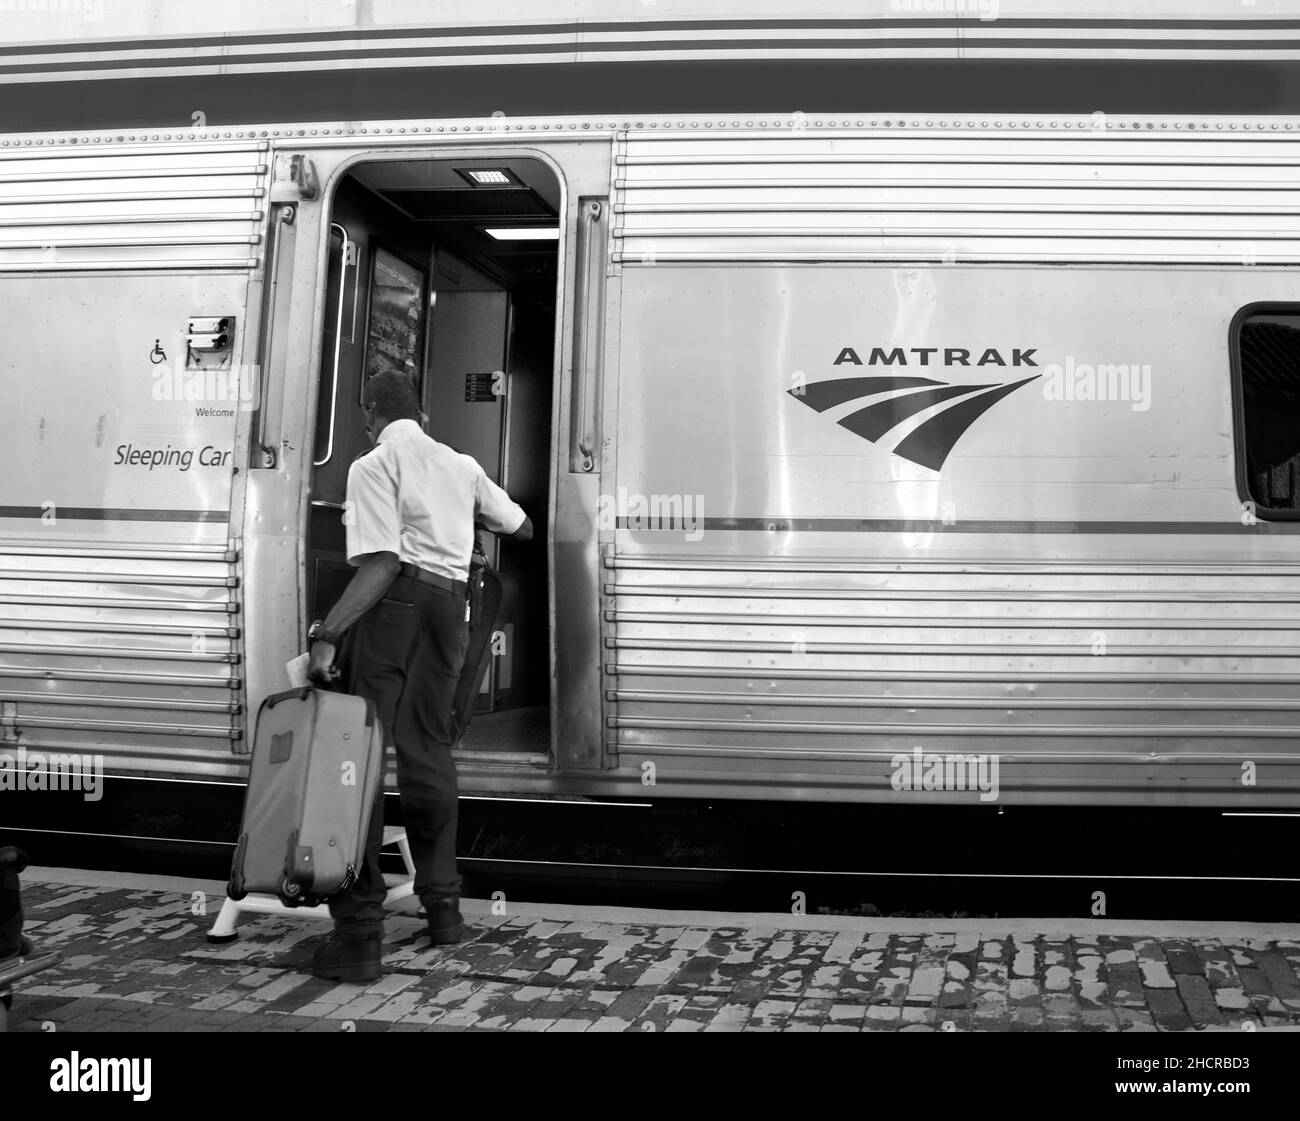 An Amtrak train porter helps load a boarding passenger's luggage at the train station in Lamy, New Mexico. Stock Photo